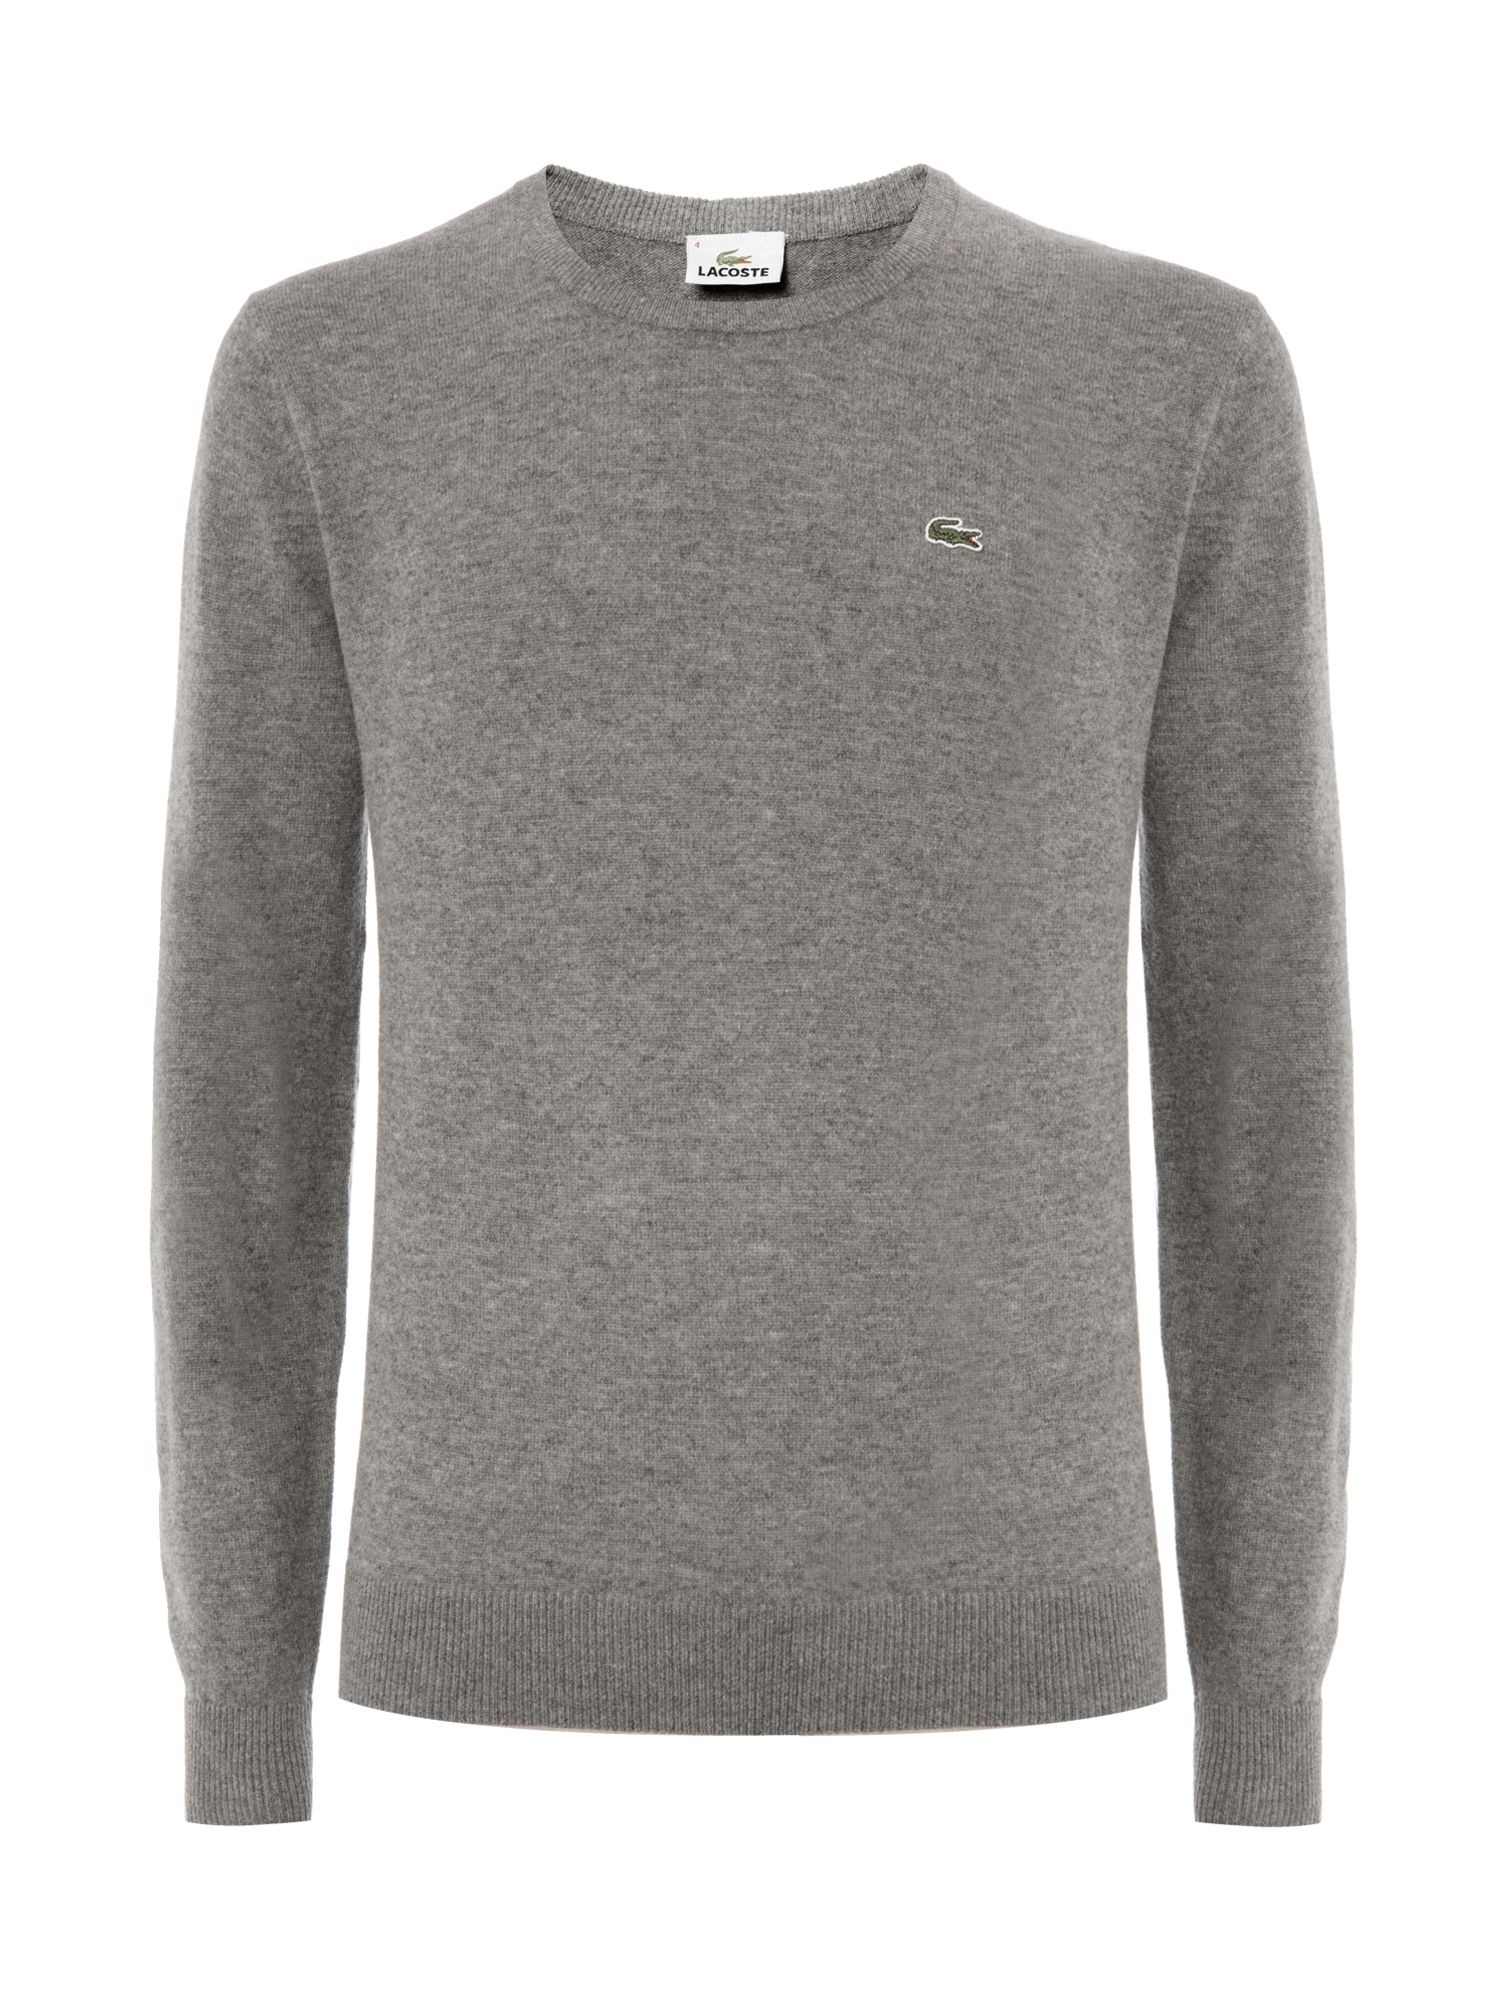 Lacoste | Gray Crew Neck Wool Sweater for Men | Lyst